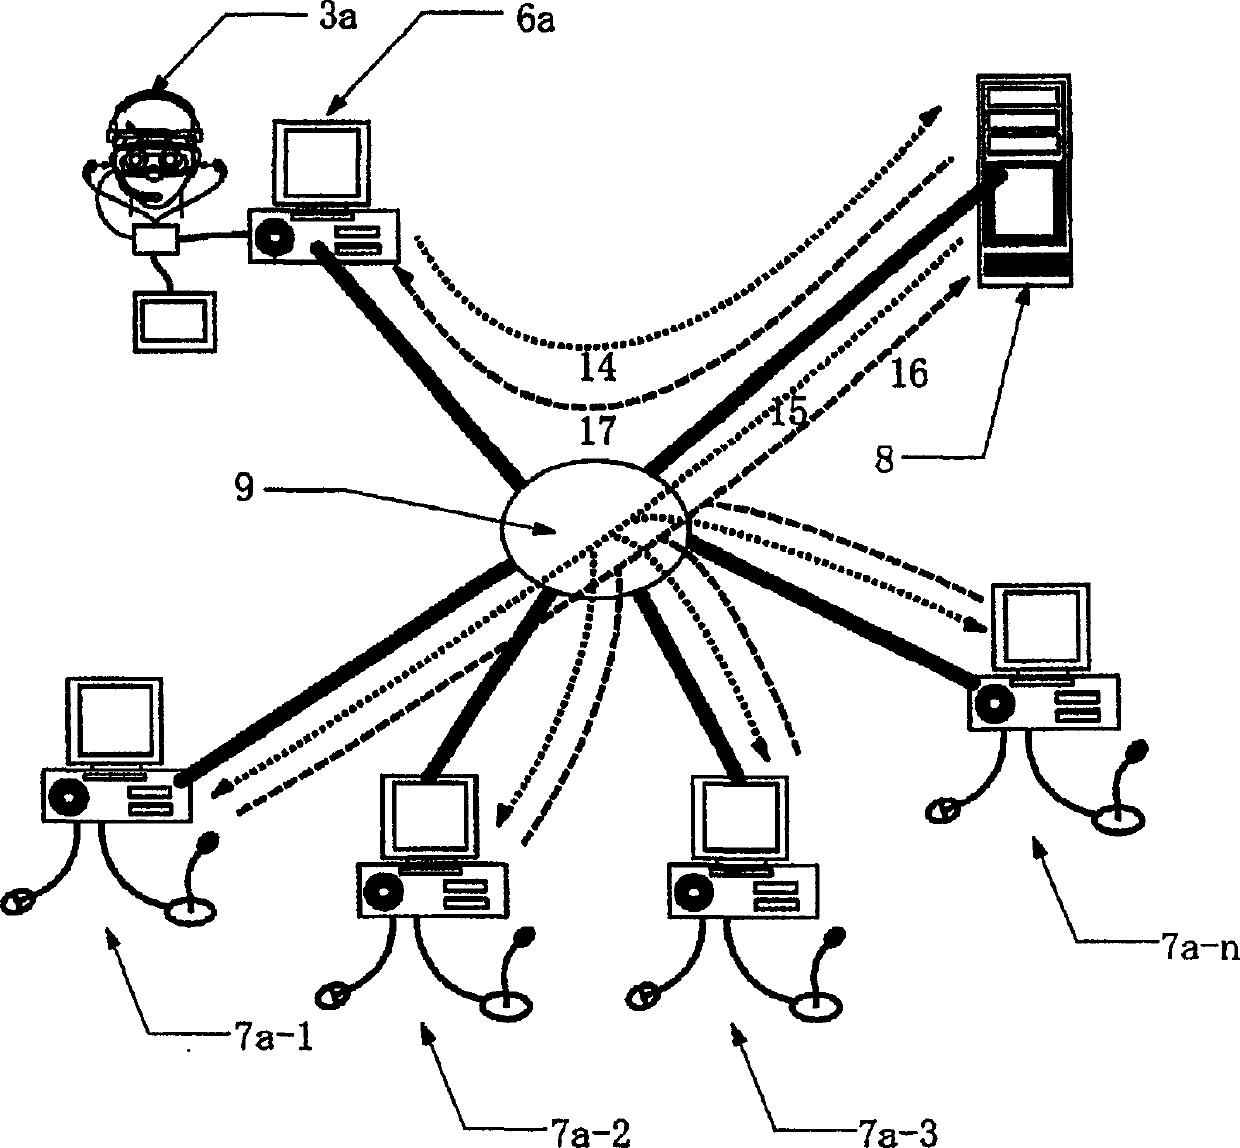 Remote internet technical guidance/education distribution system using practitioner's vision, and guidance system using communication network